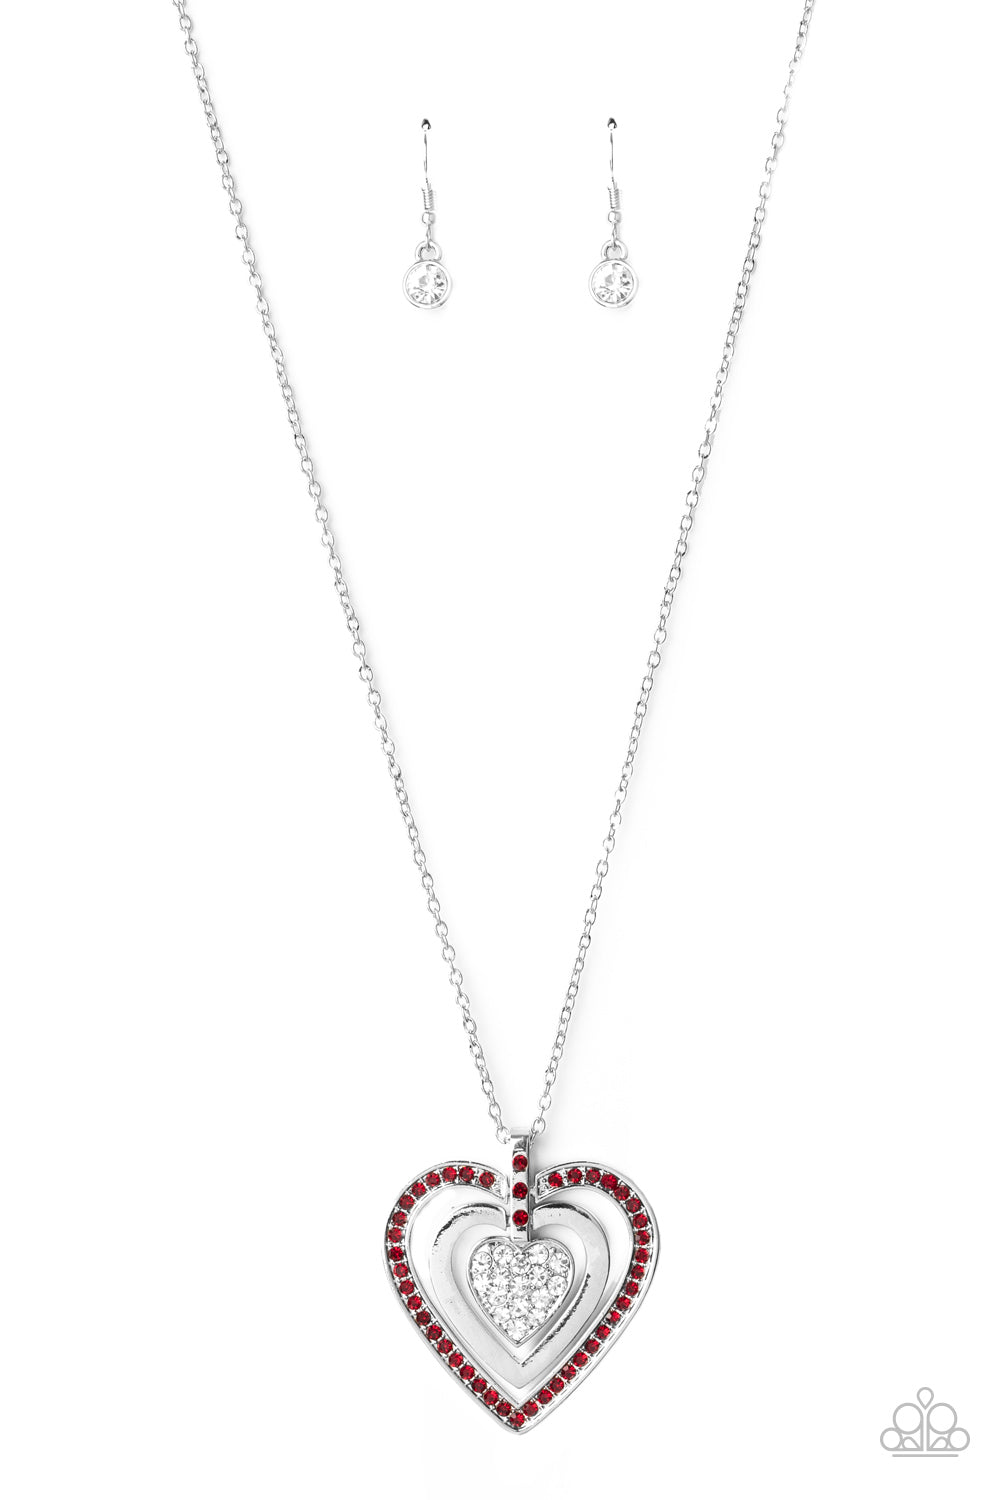 A red rhinestone encrusted heart, shiny silver heart, and glittery white rhinestone encrusted heart swings from the bottom of a red rhinestone dotted fitting, creating a romantically oversized pendant below the collar. 